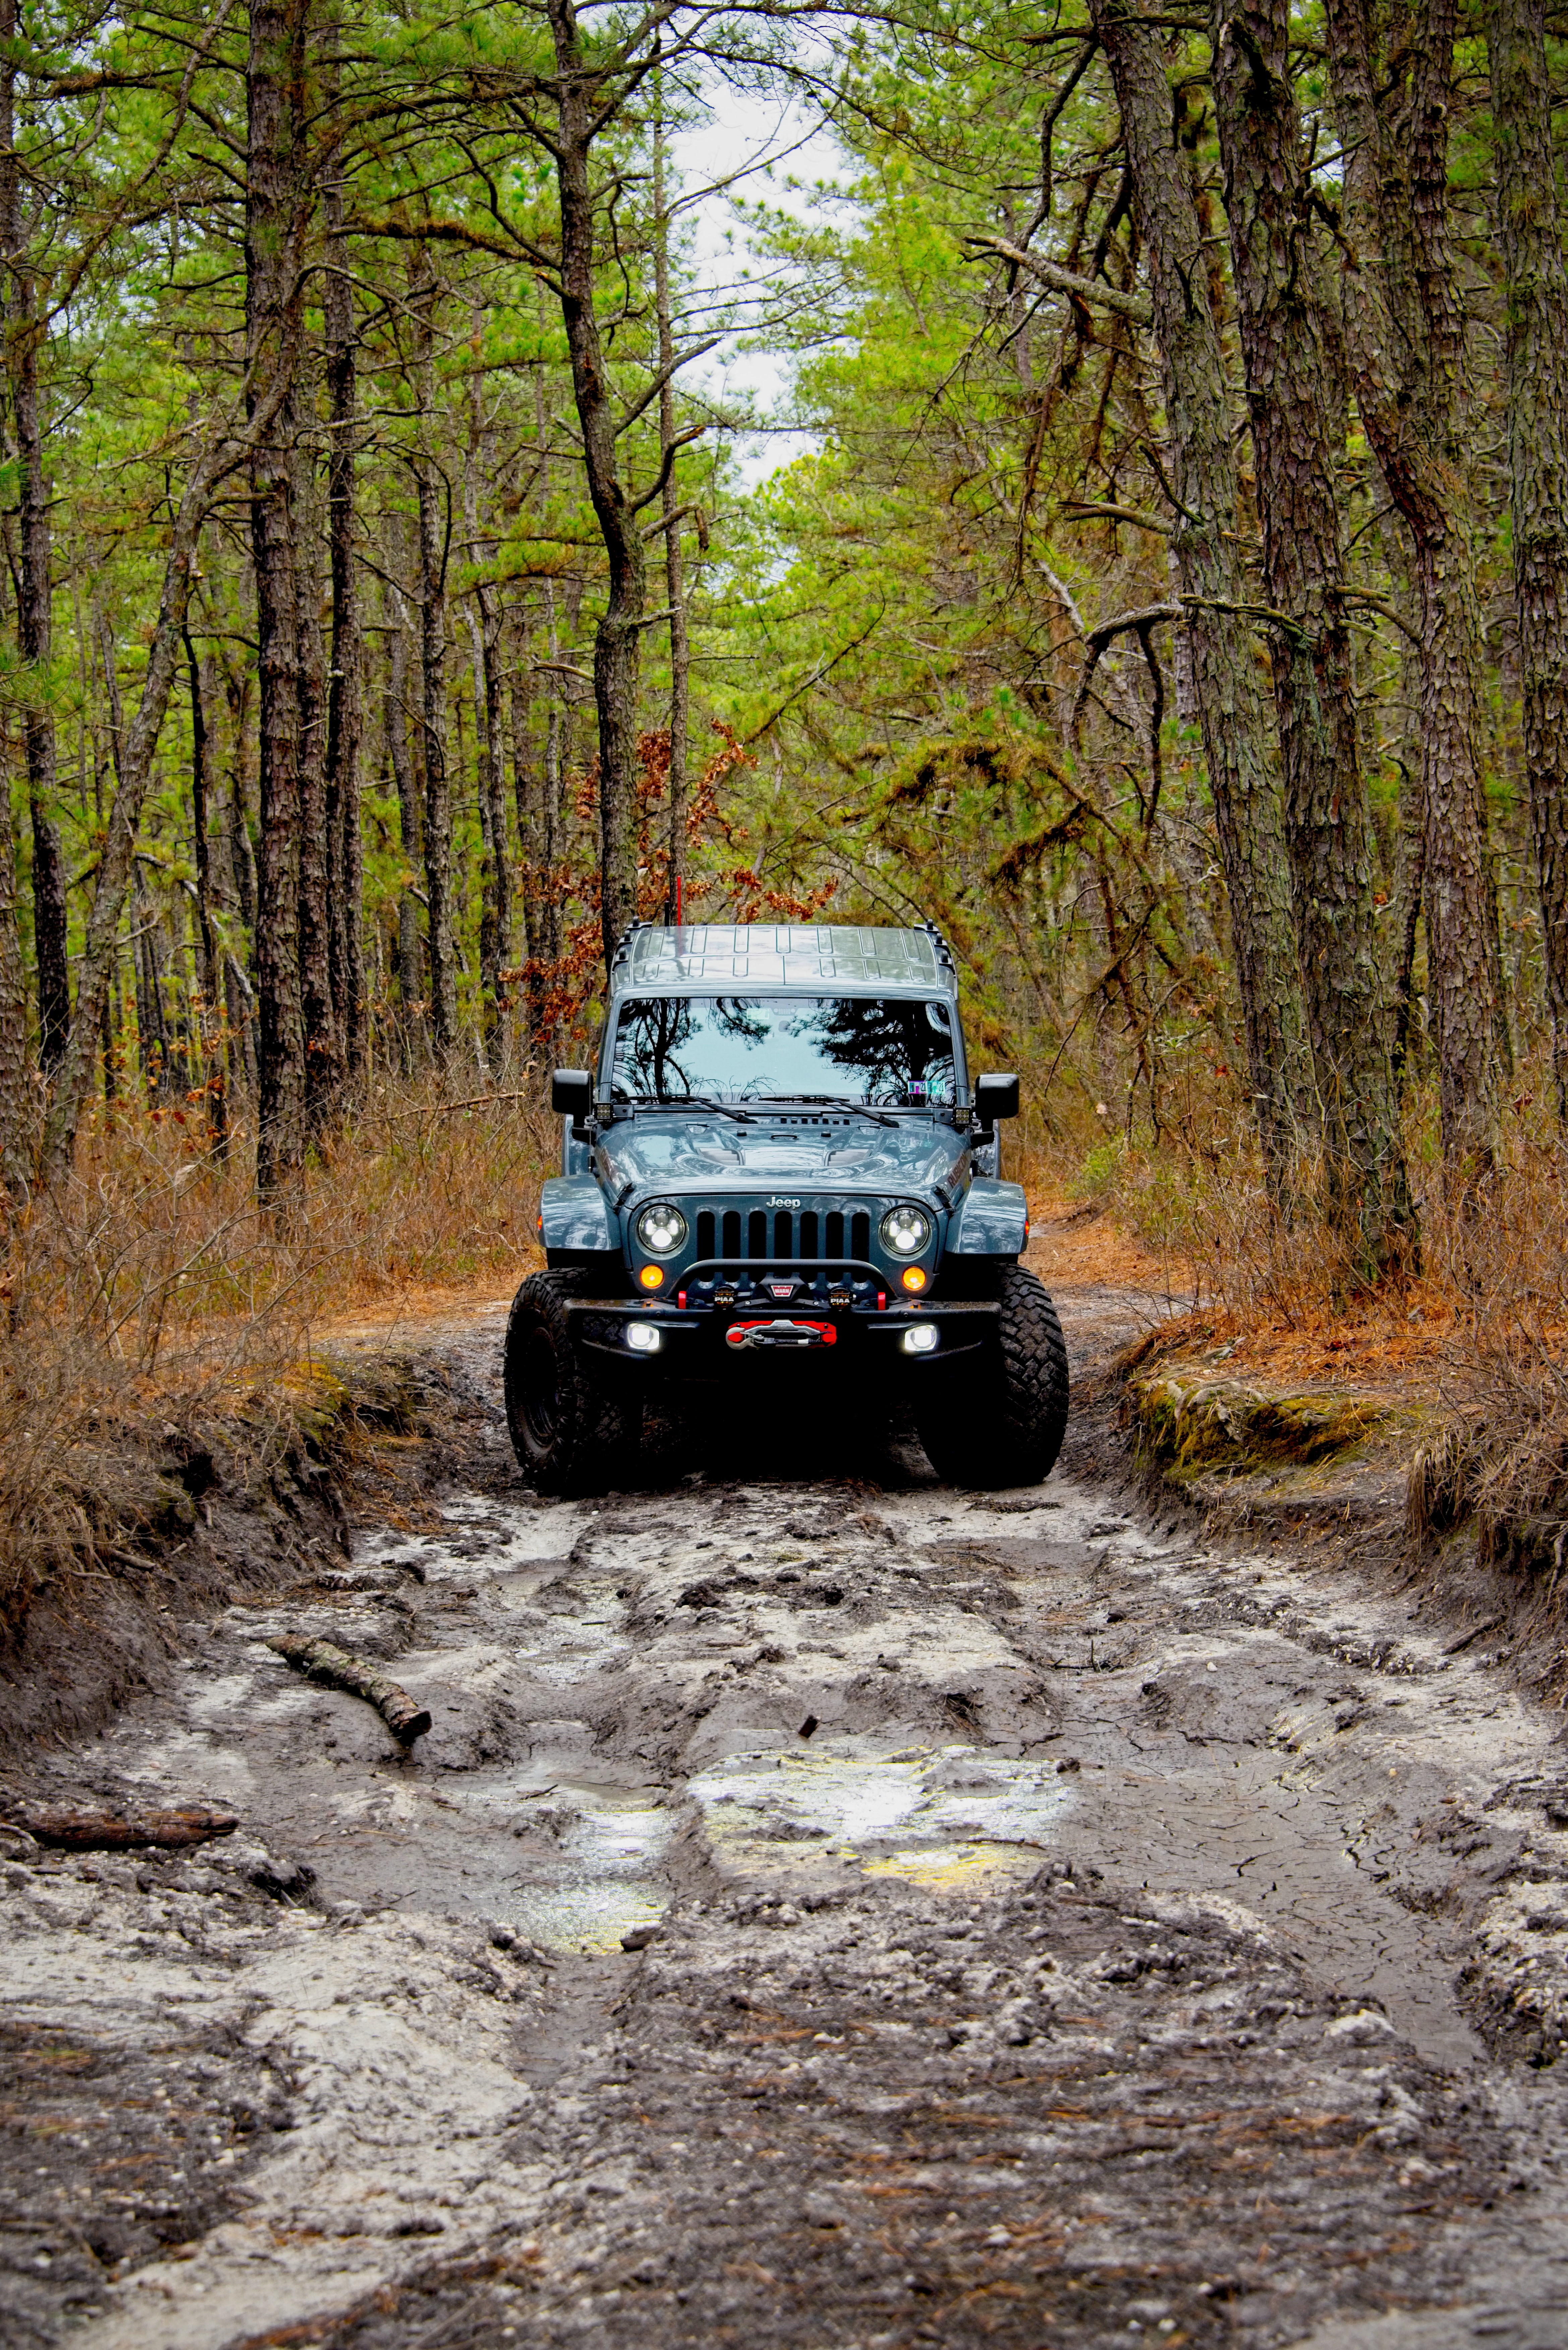 jeep wrangler, forest, front view, cars collection of HD images